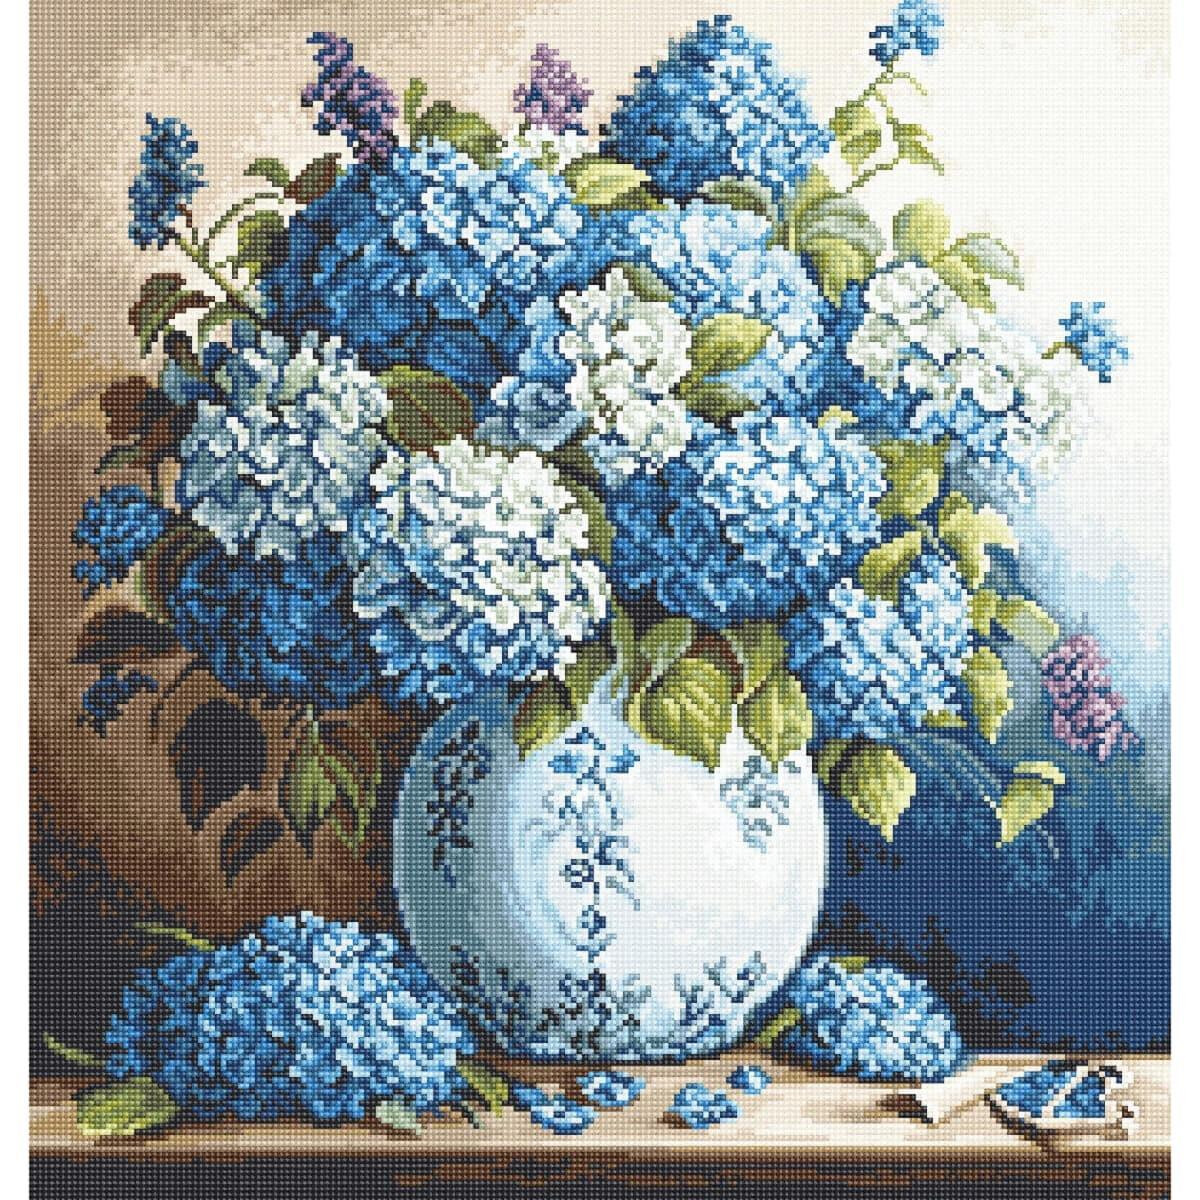 A flower arrangement of blue and white hydrangeas in a...